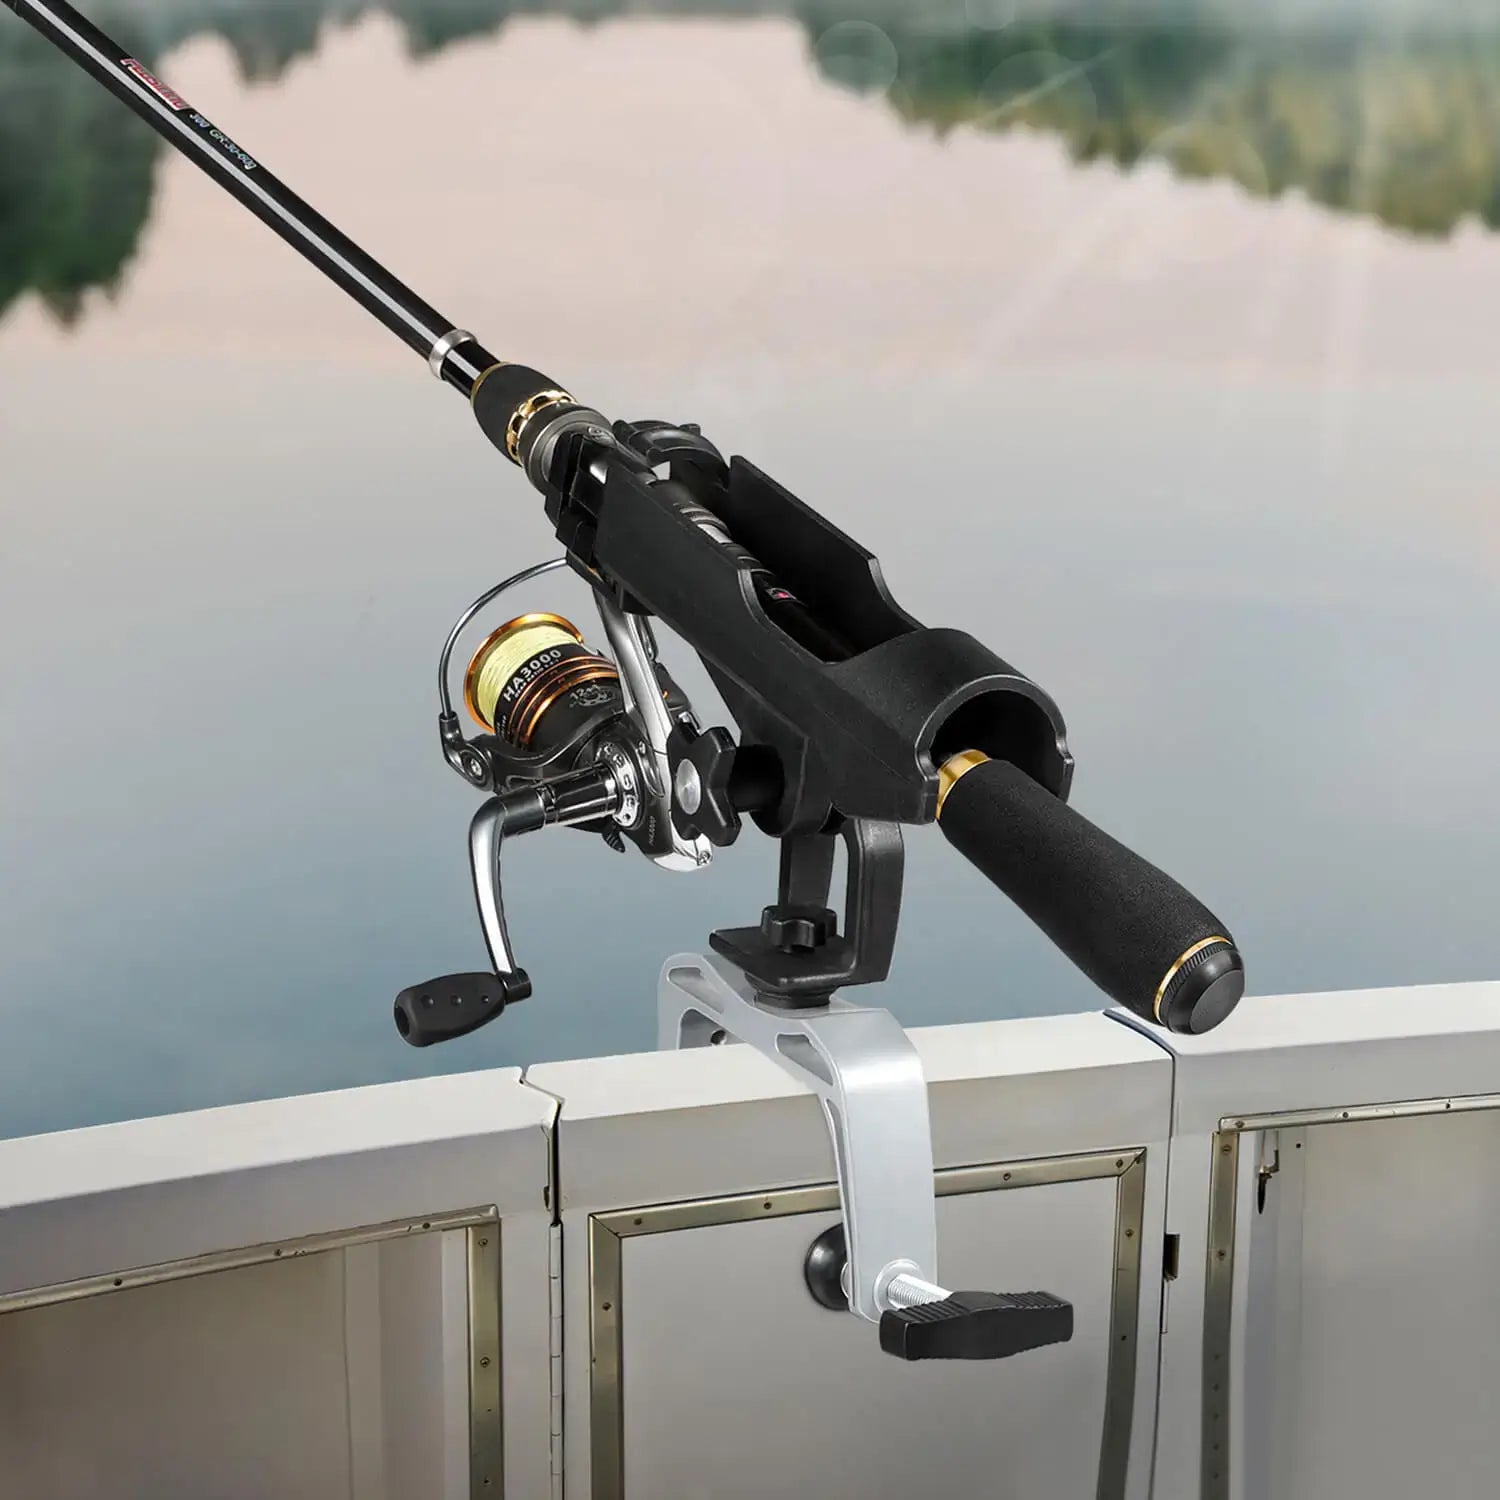 PLUSINNO RH30 Fishing Boat Rods Holder with Large Clamp – Plusinno